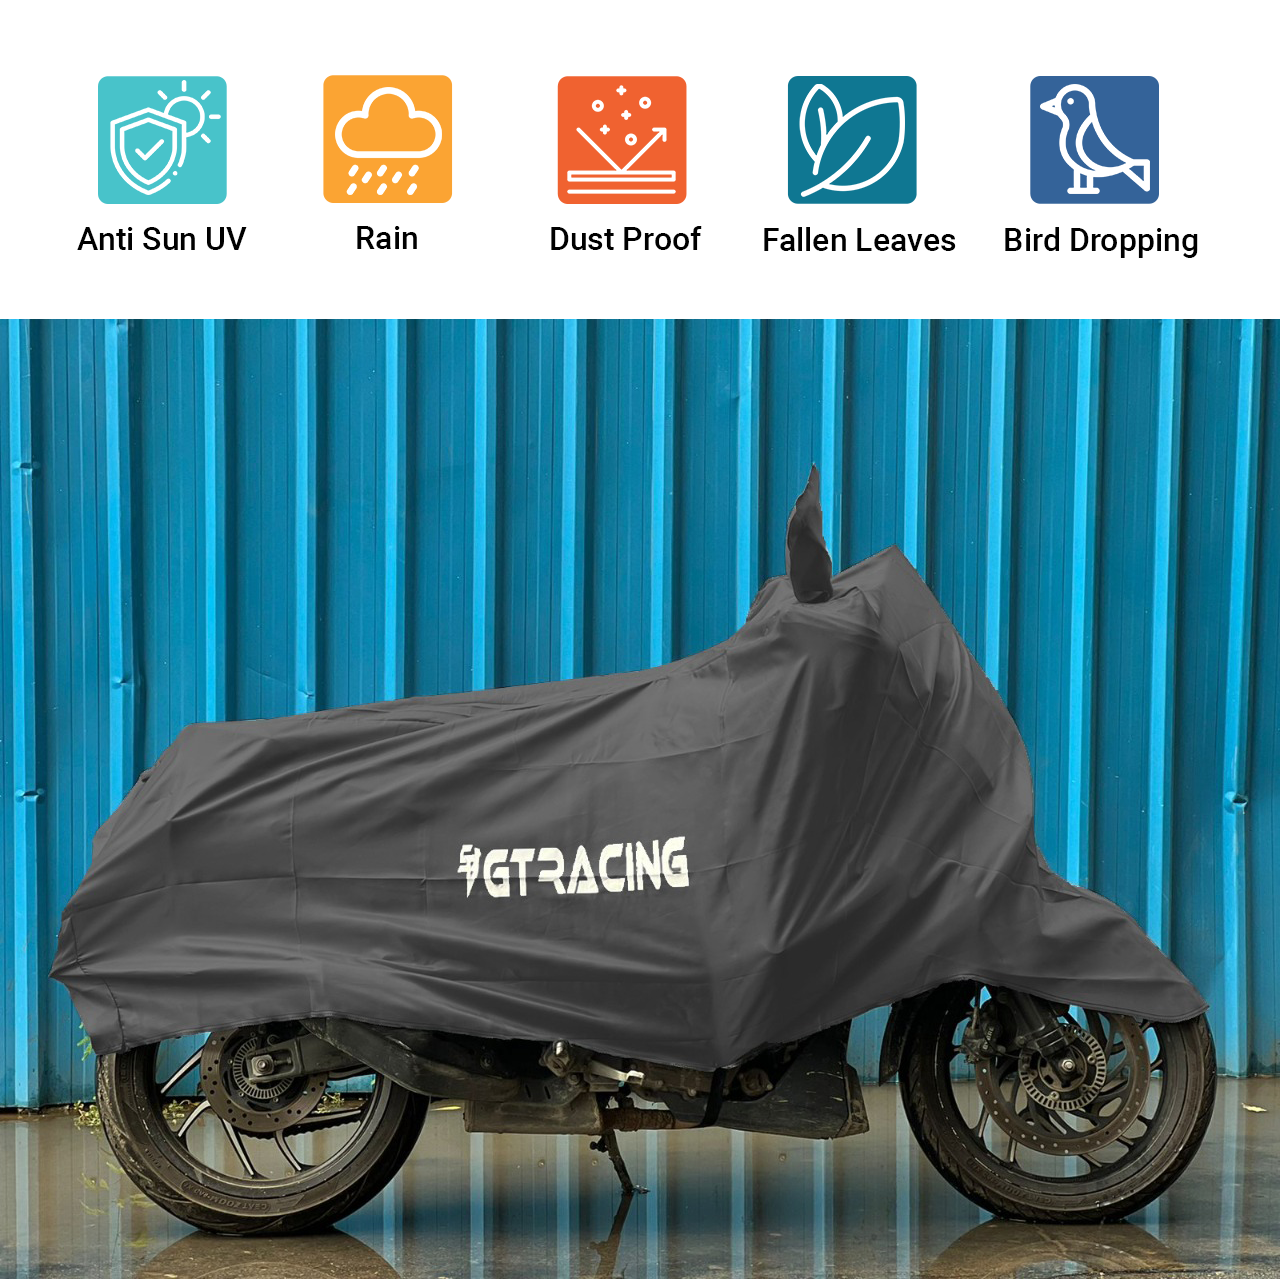 Steelbird Bike Cover GT Racing UV Protection Water-Resistant & Dustproof (2X2 Grey), Bike Body Cover with Carry Bag